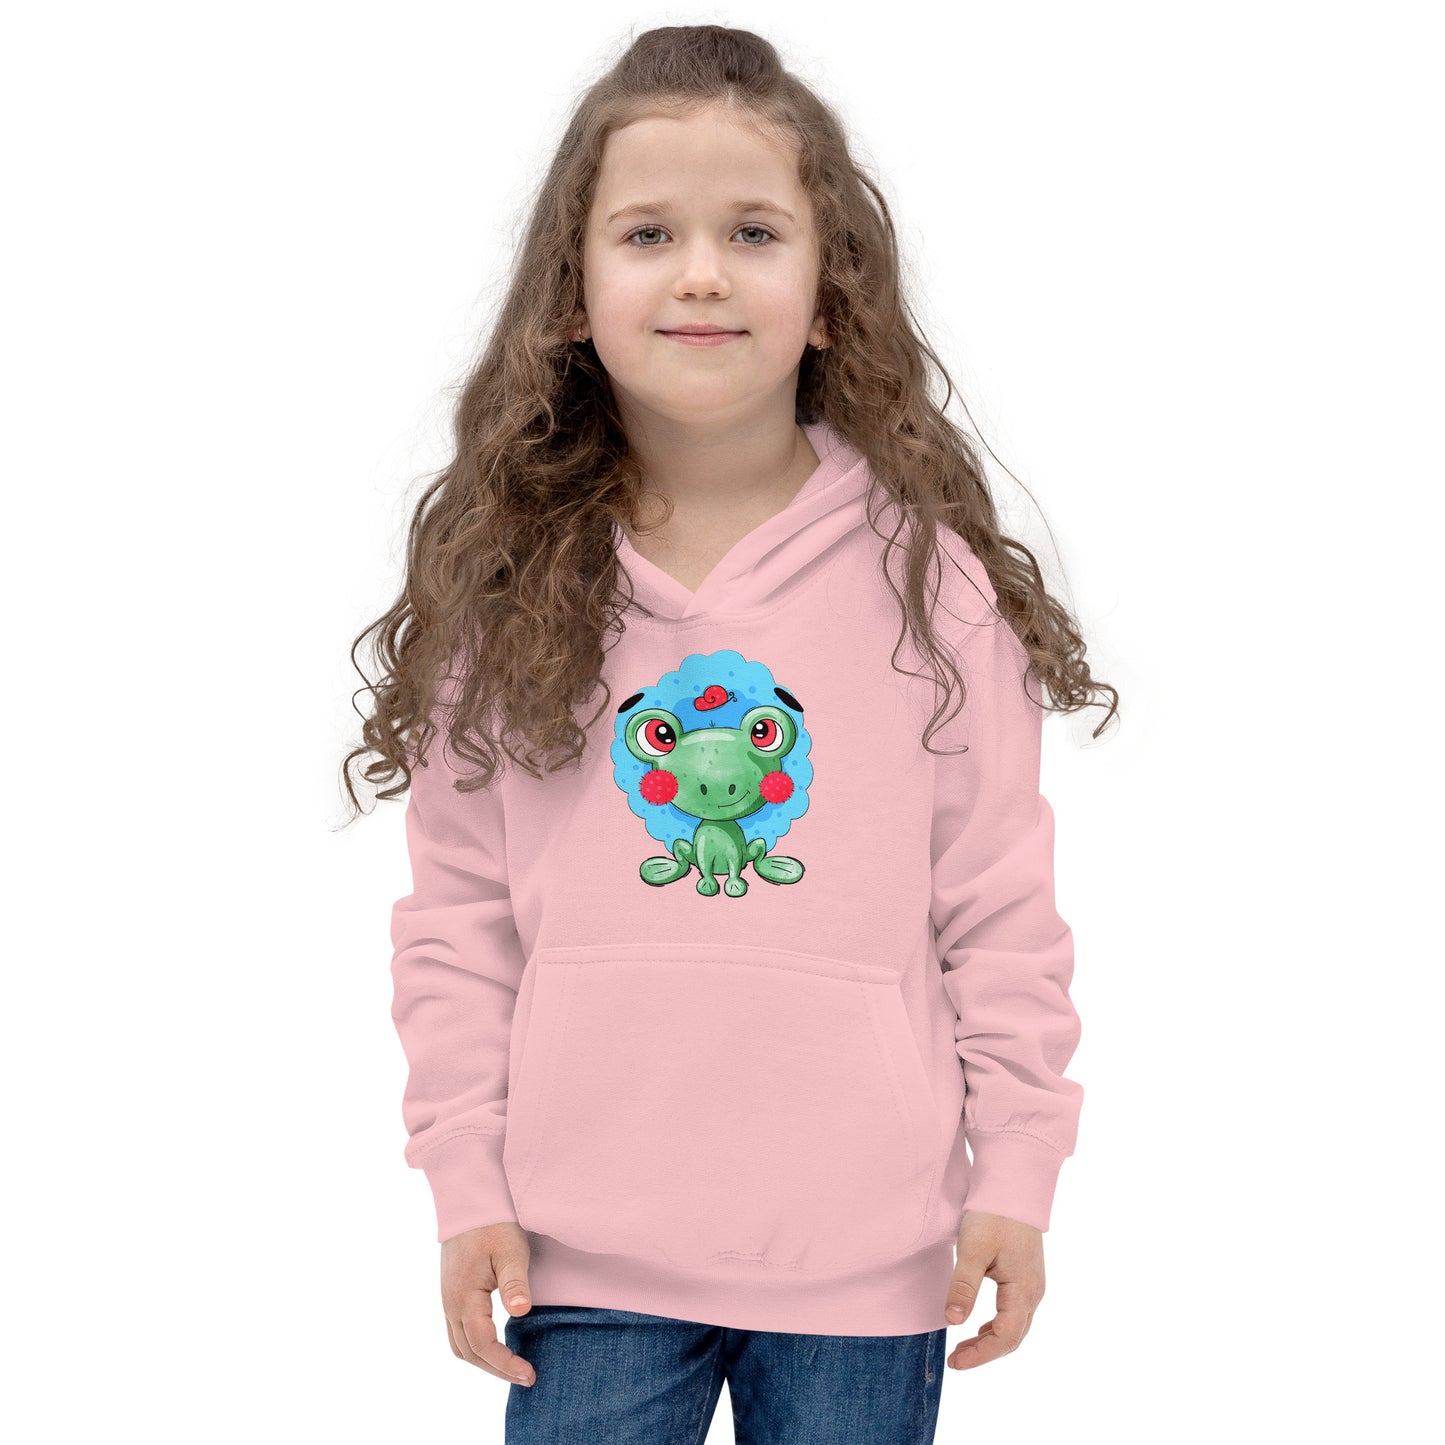 Lovely Frog Hoodie, No. 0474